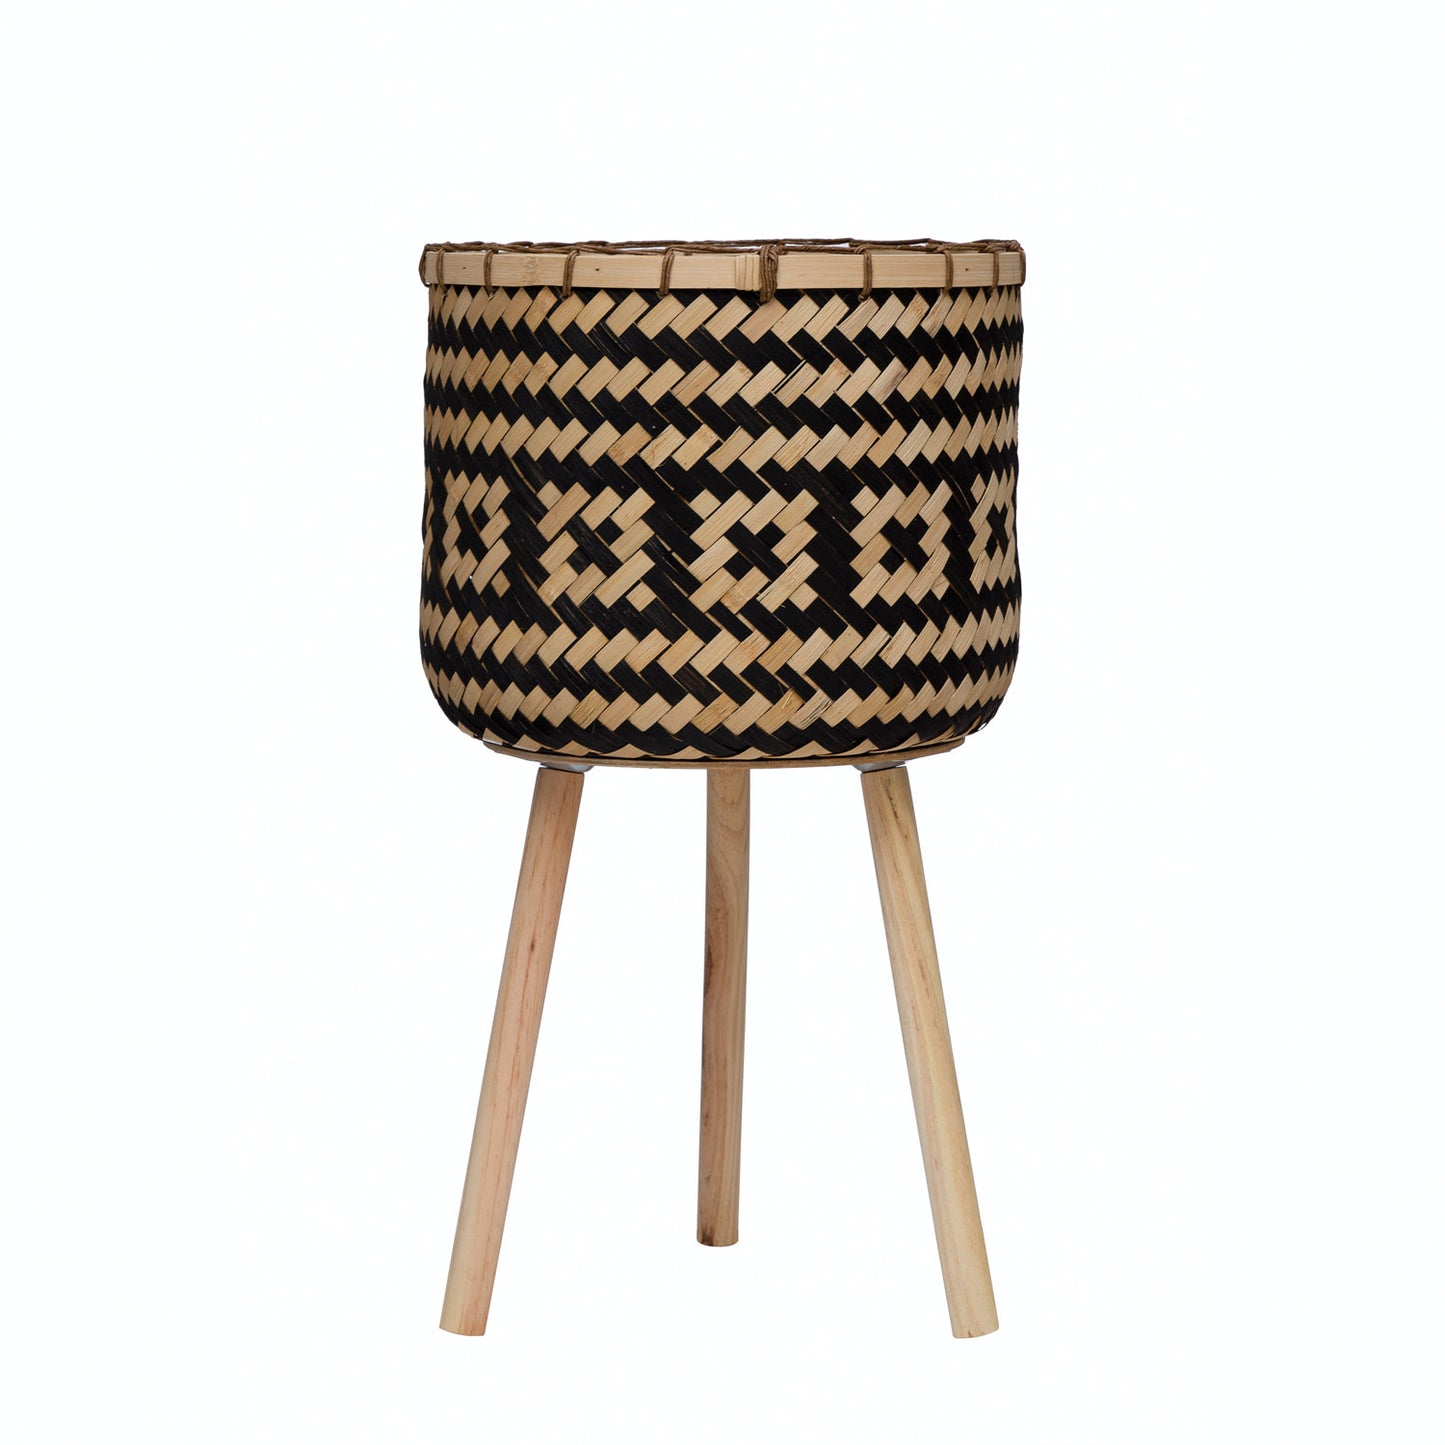 Decor-Woven Bamboo Basket with Wood Legs and Pattern